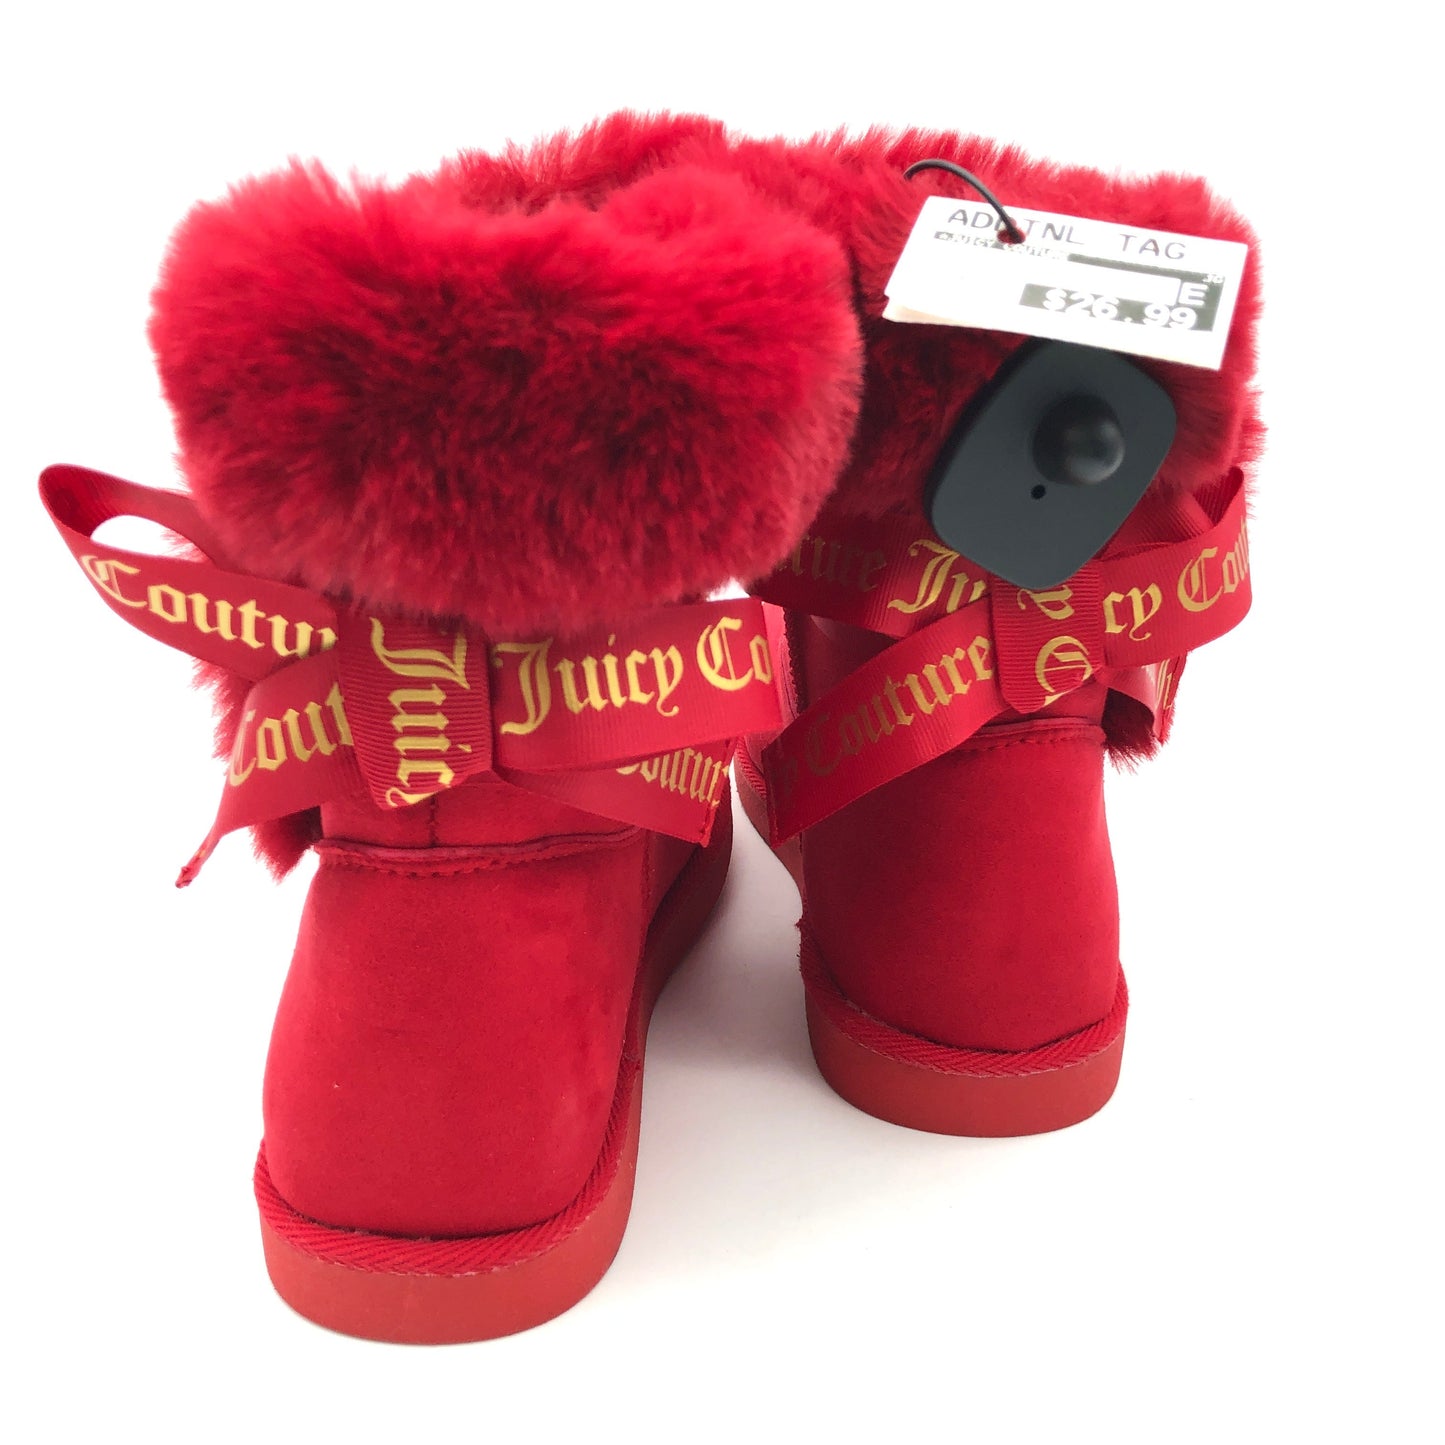 Boots Snow By Juicy Couture  Size: 9